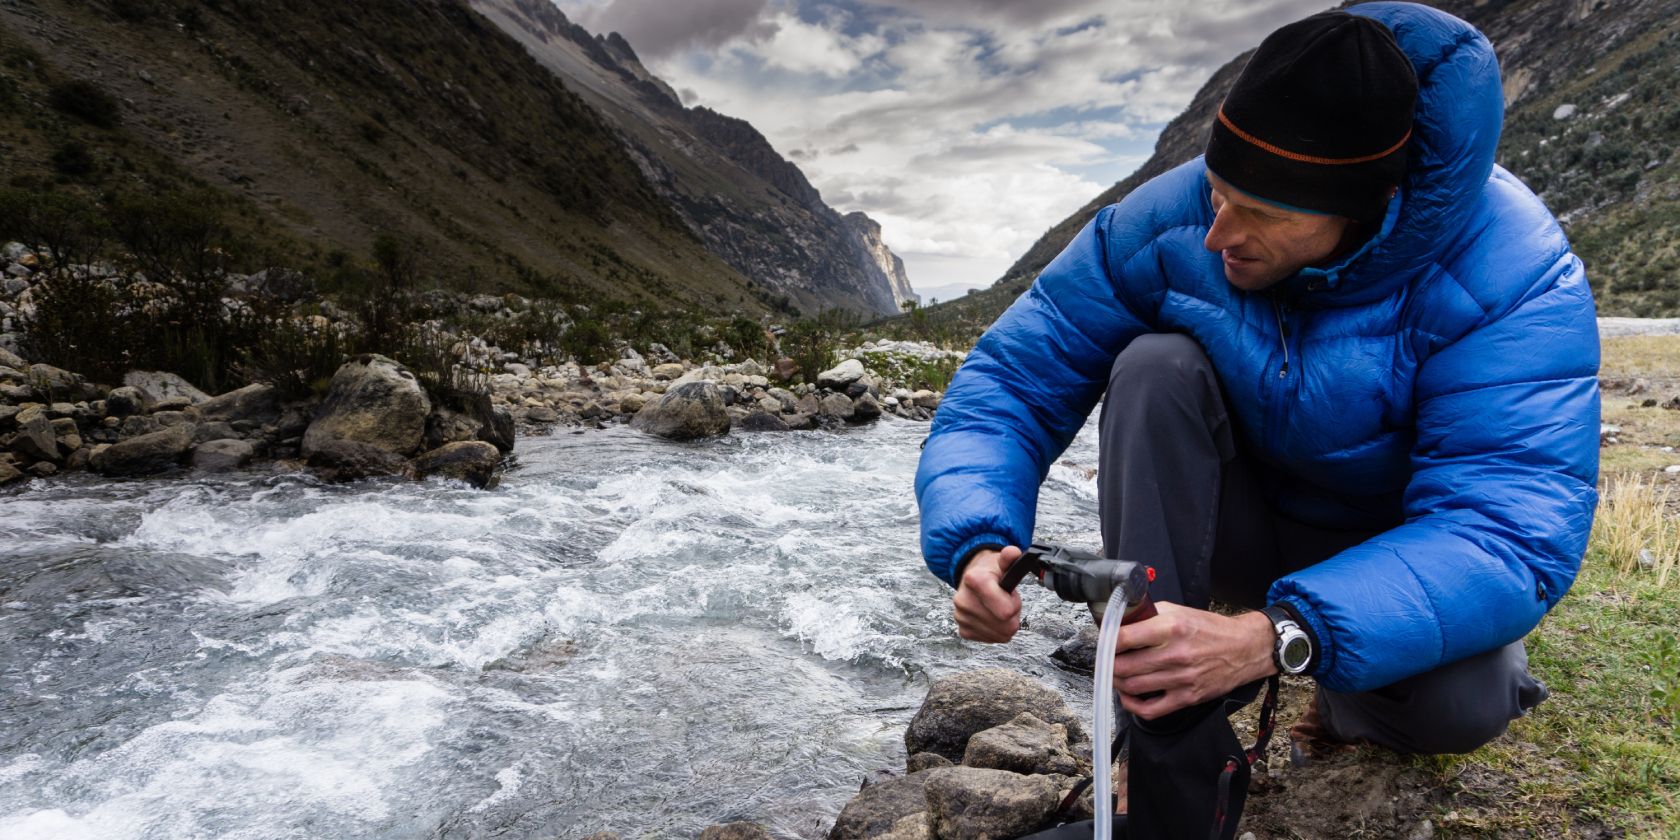 Backpacker using a water filter on a mountain stream